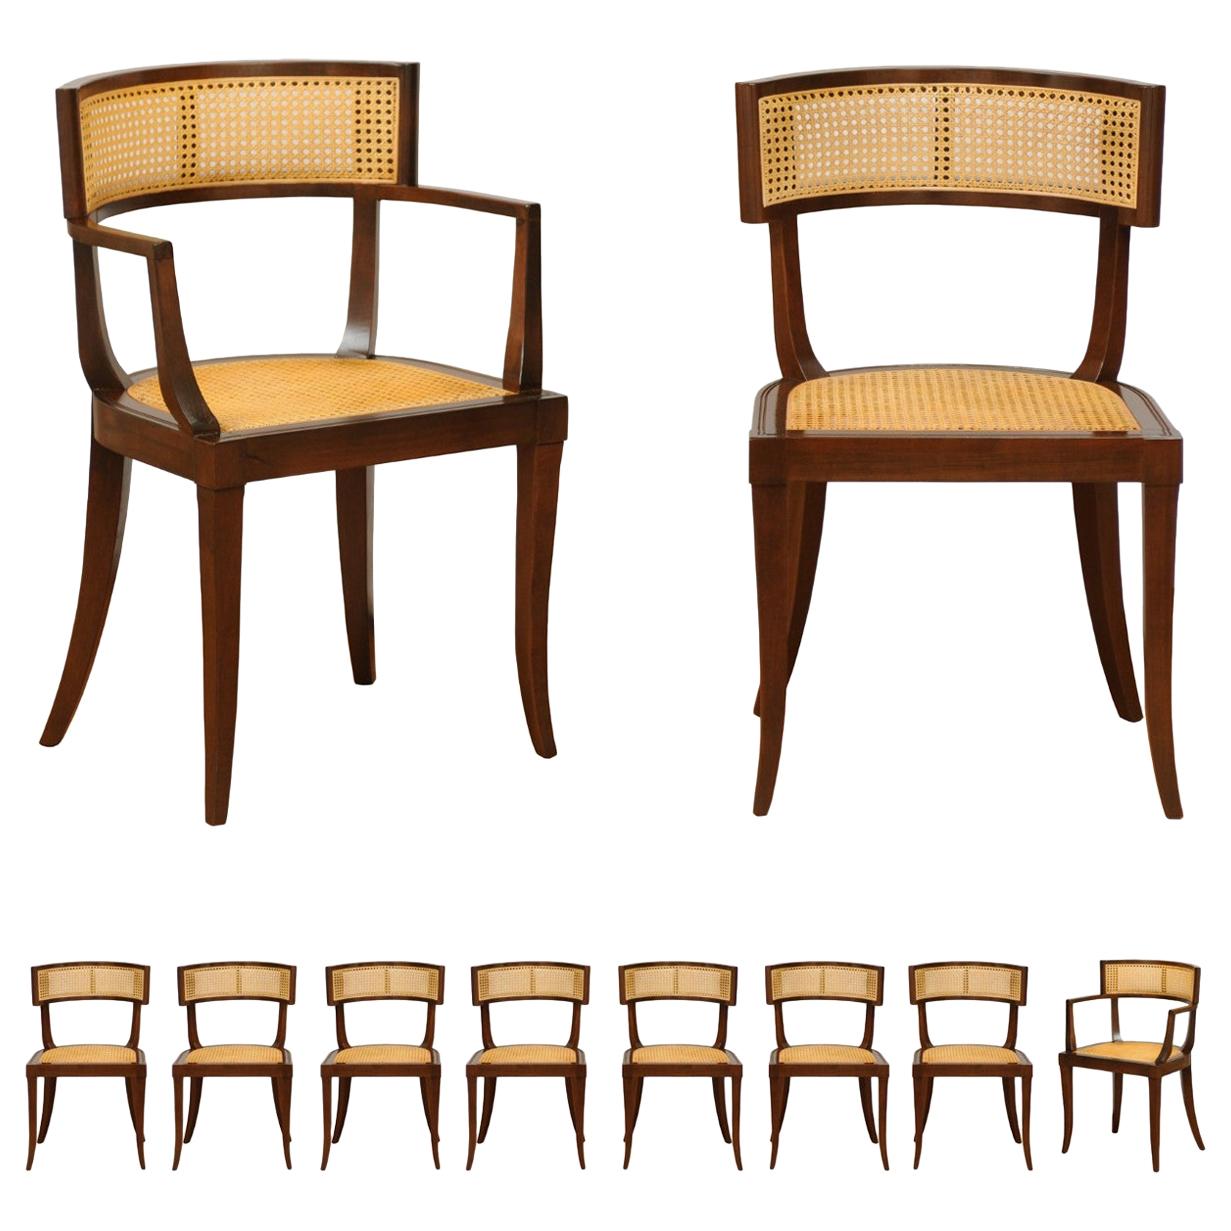 Exquisite Set of 10 Klismos Cane Dining Chairs by Baker, circa 1958, Cane Seats